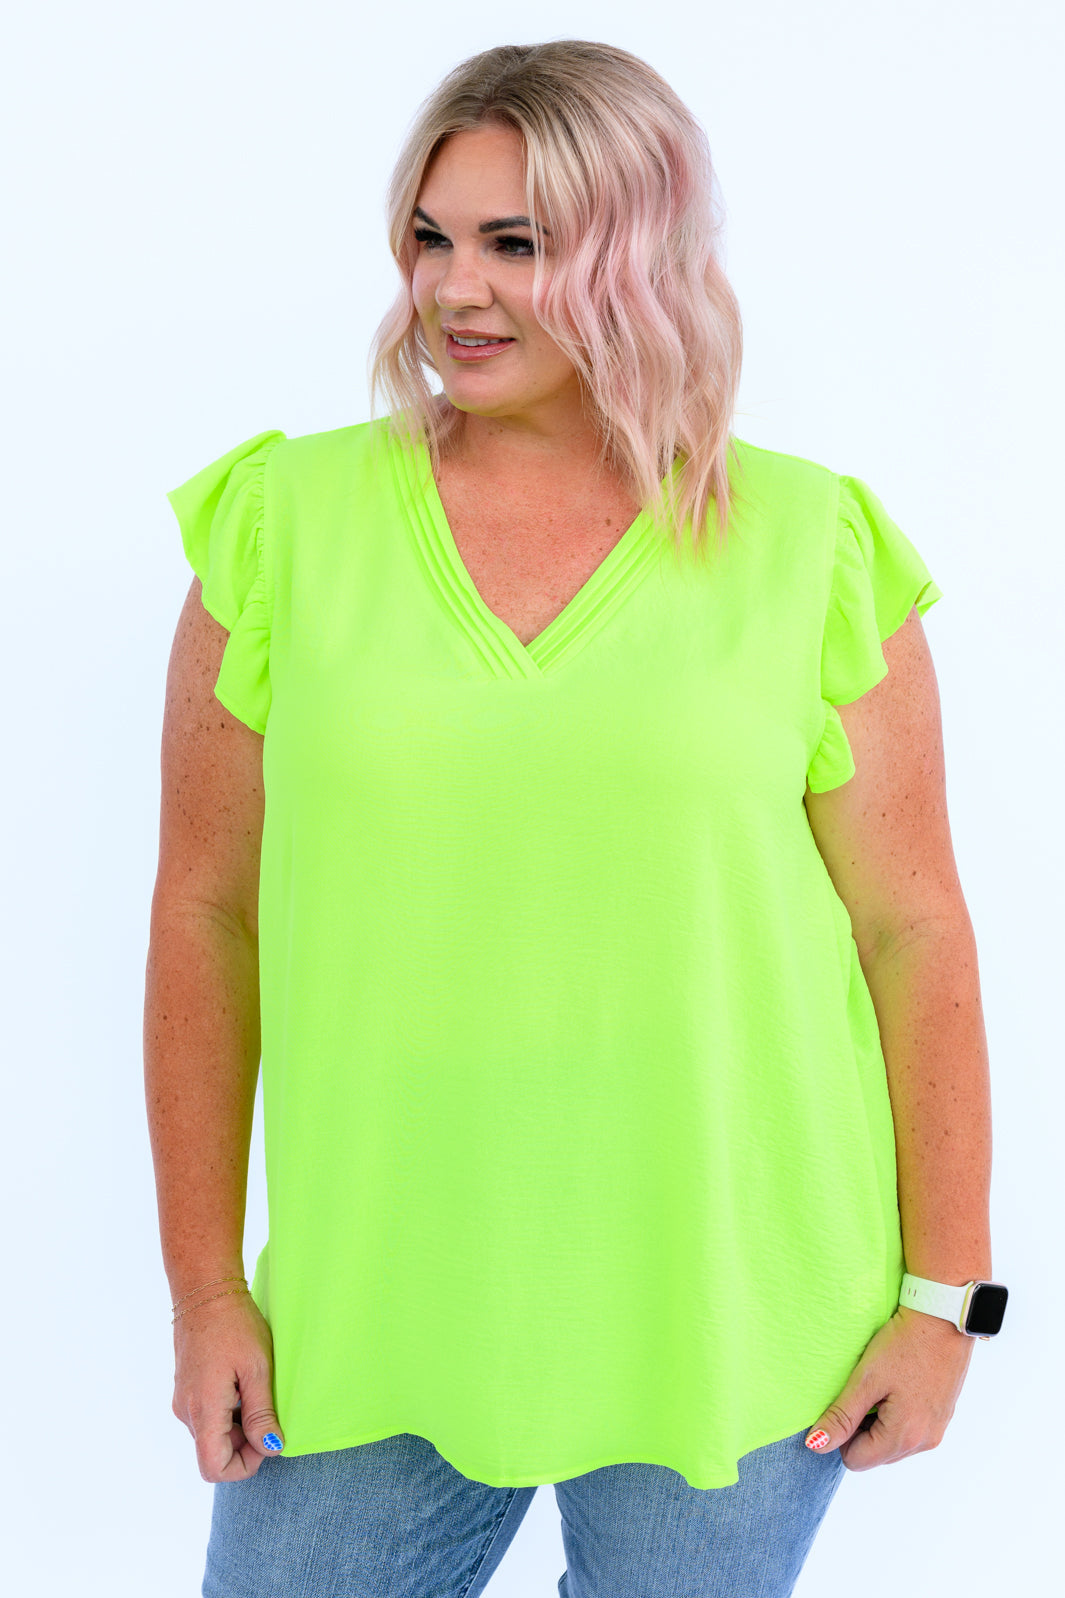 Under Neon Lights Ruffle Sleeve Top Ave Shops